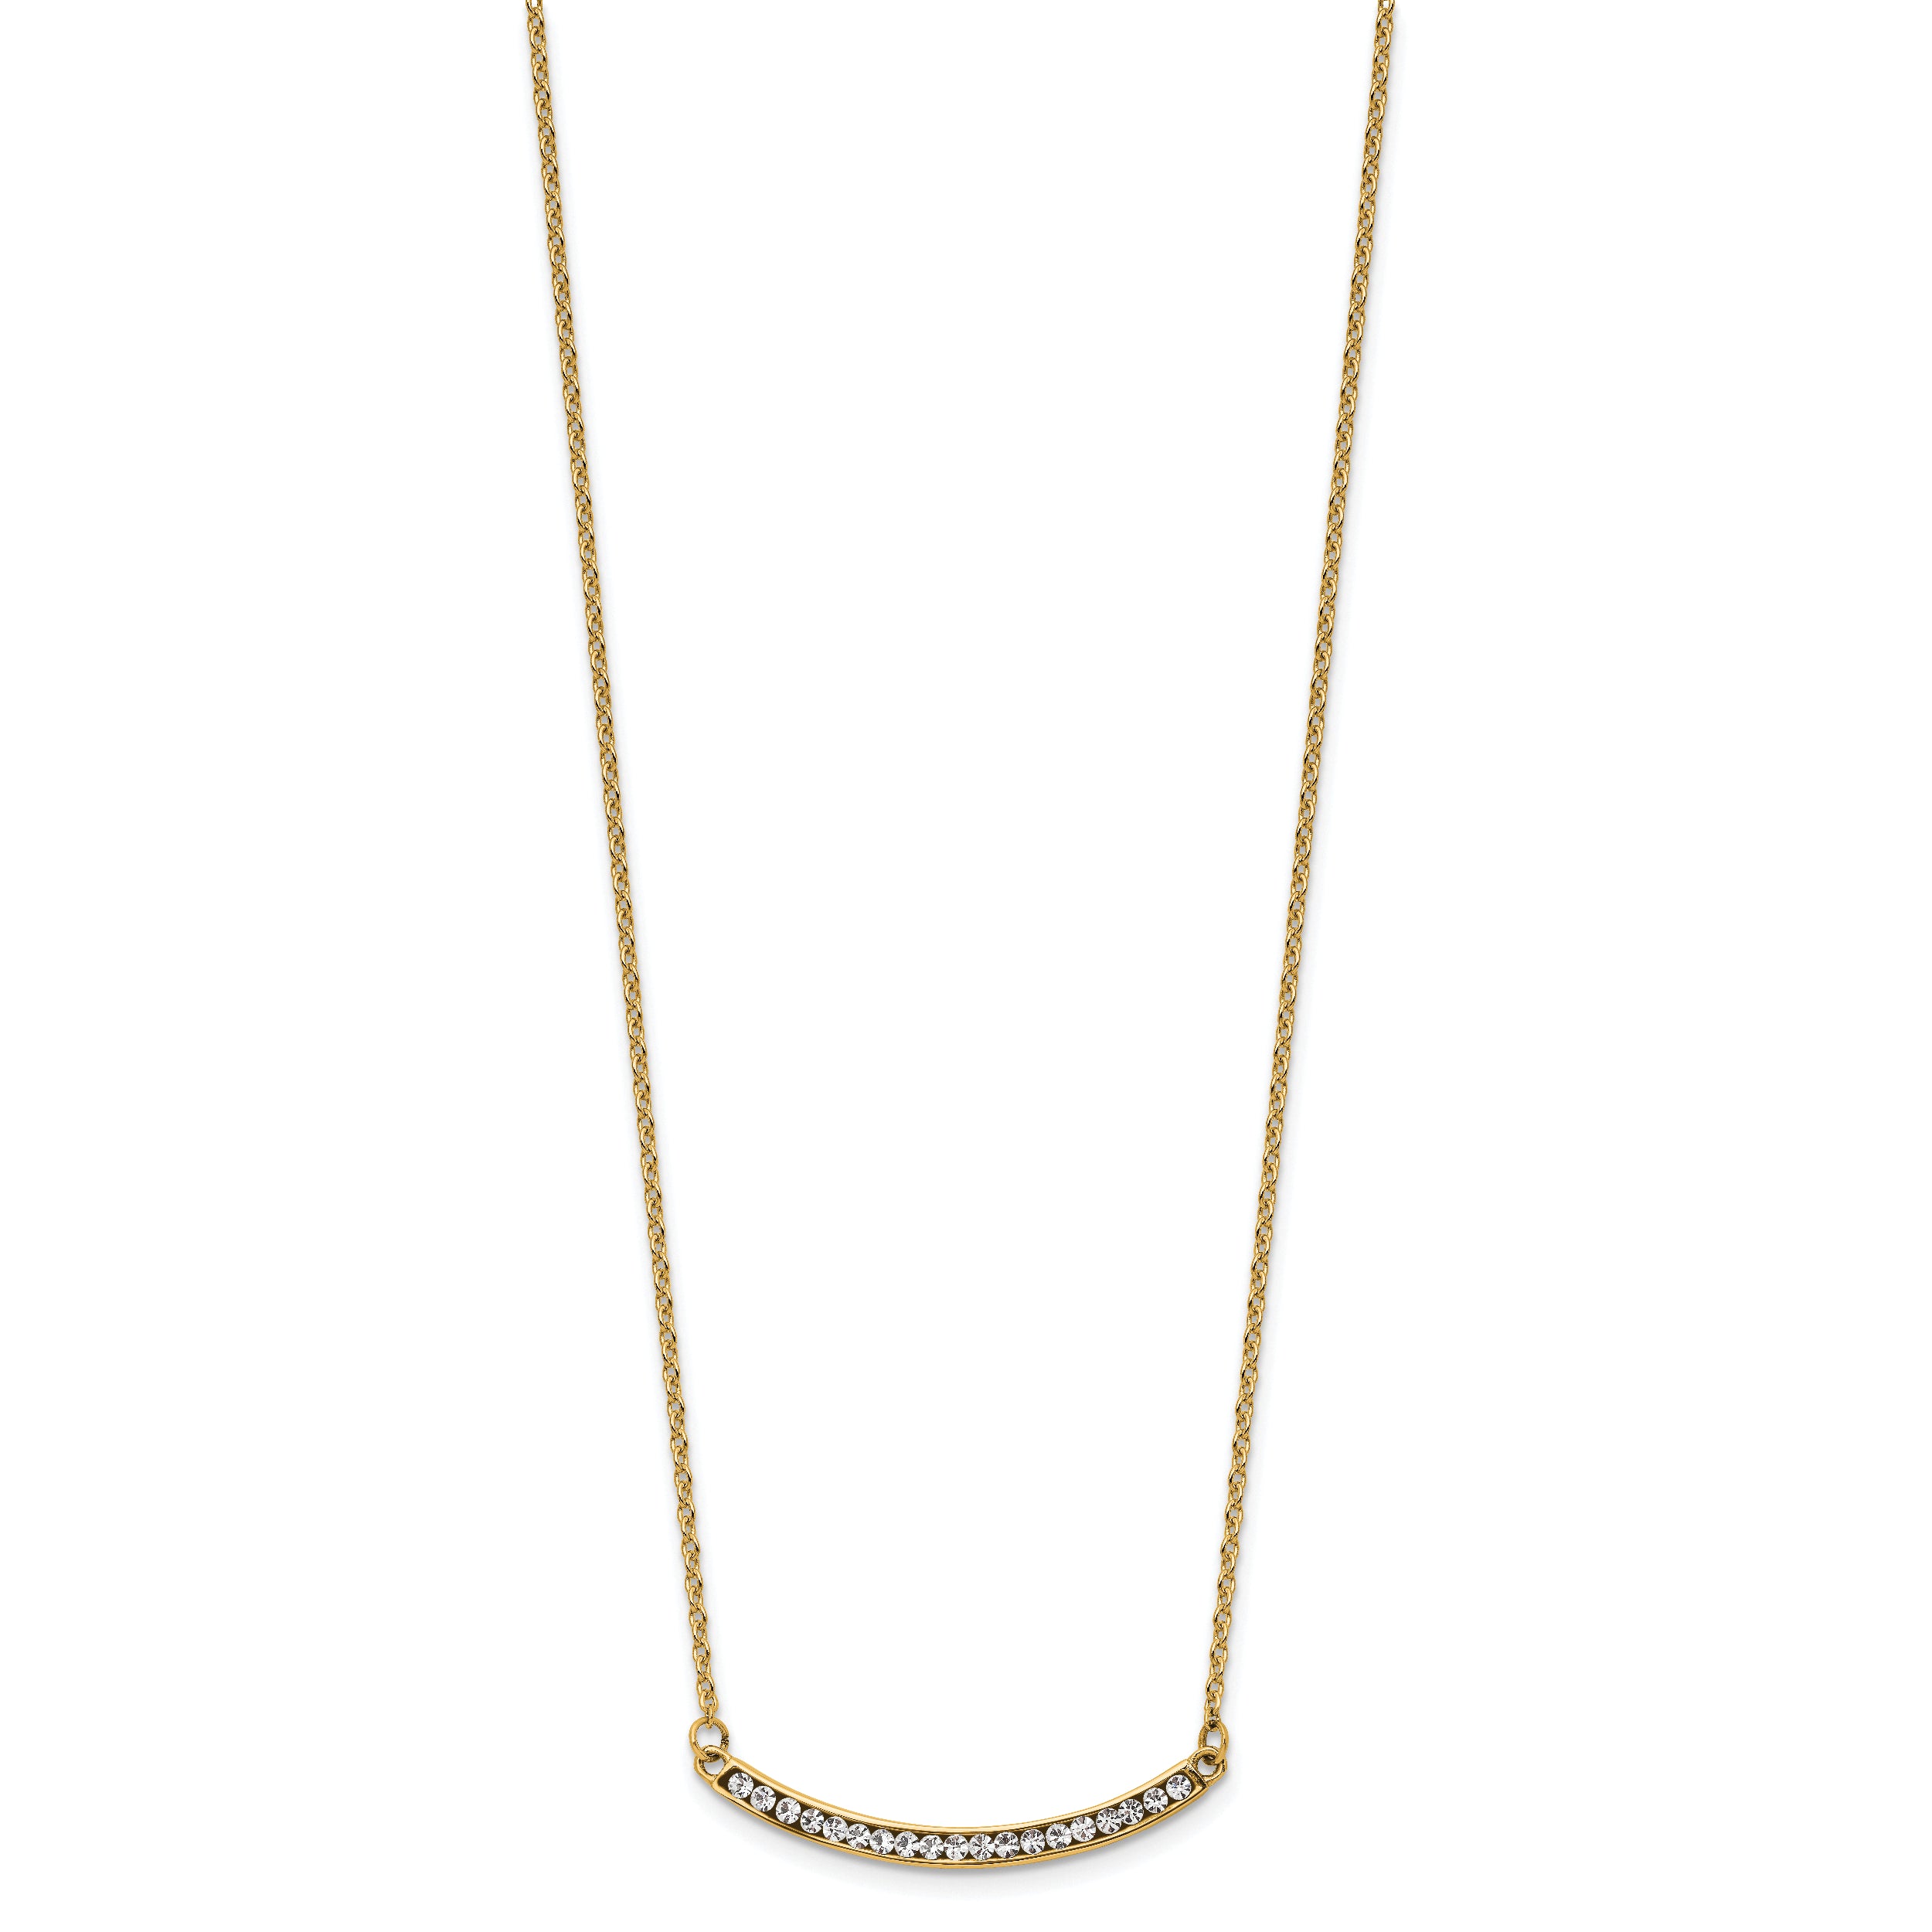 Chisel Stainless Steel Polished Yellow IP-plated Preciosa Crystal Curved Bar on a 17.75 inch Cable Chain with a 2 inch Extension Necklace